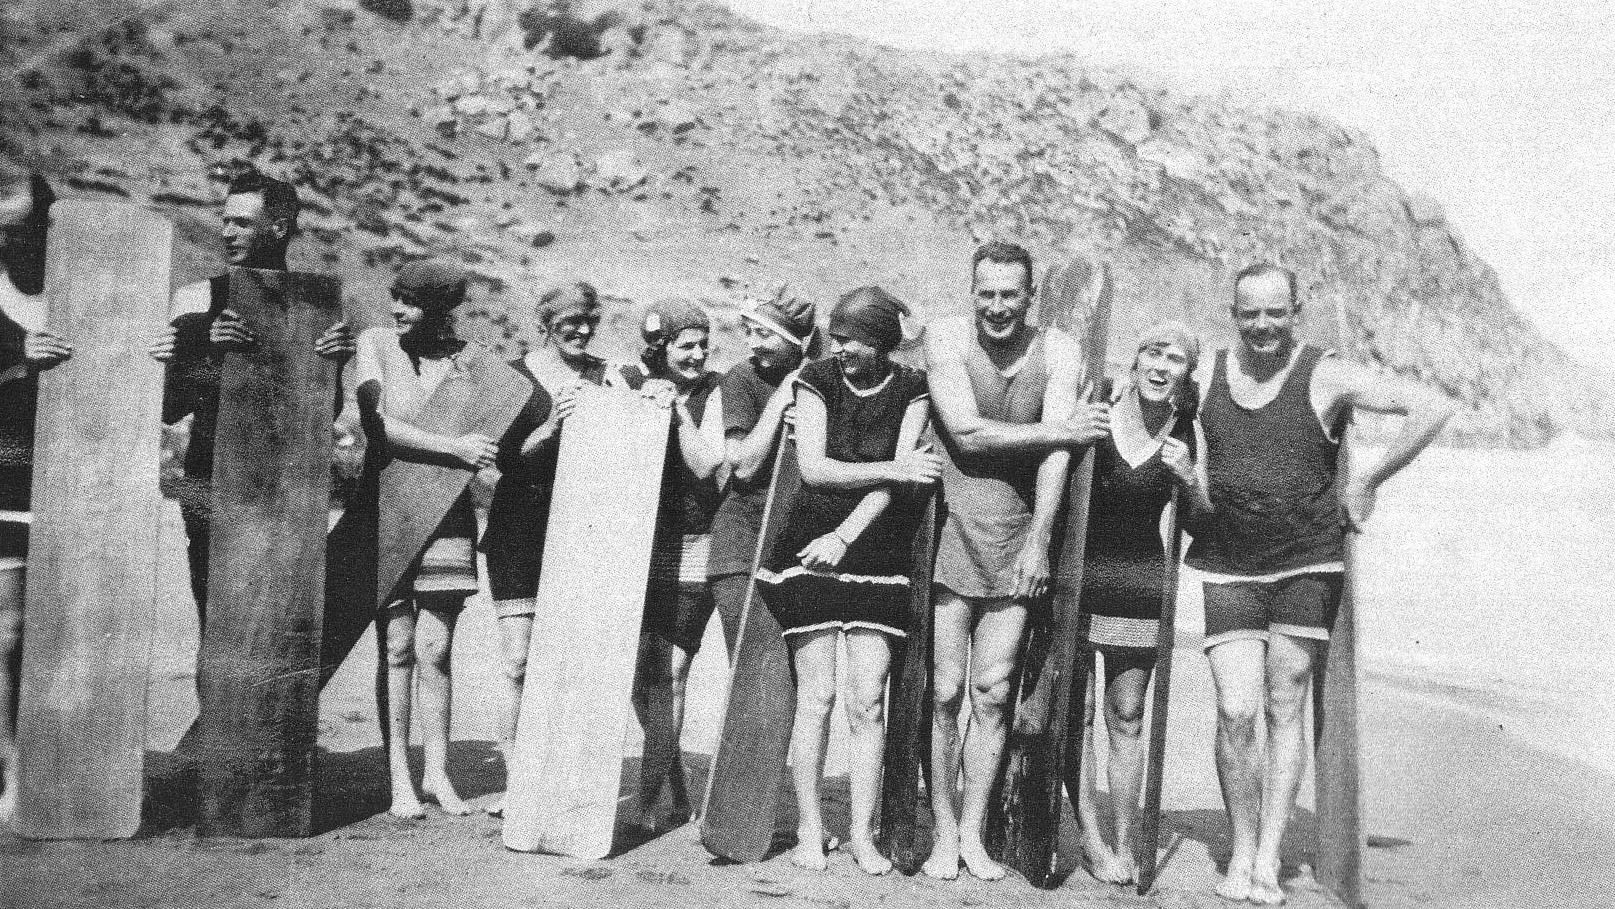 Roy Burston with family and friends all using early versions of a boogie board or bellyboard at the beach in Australia in 1924.